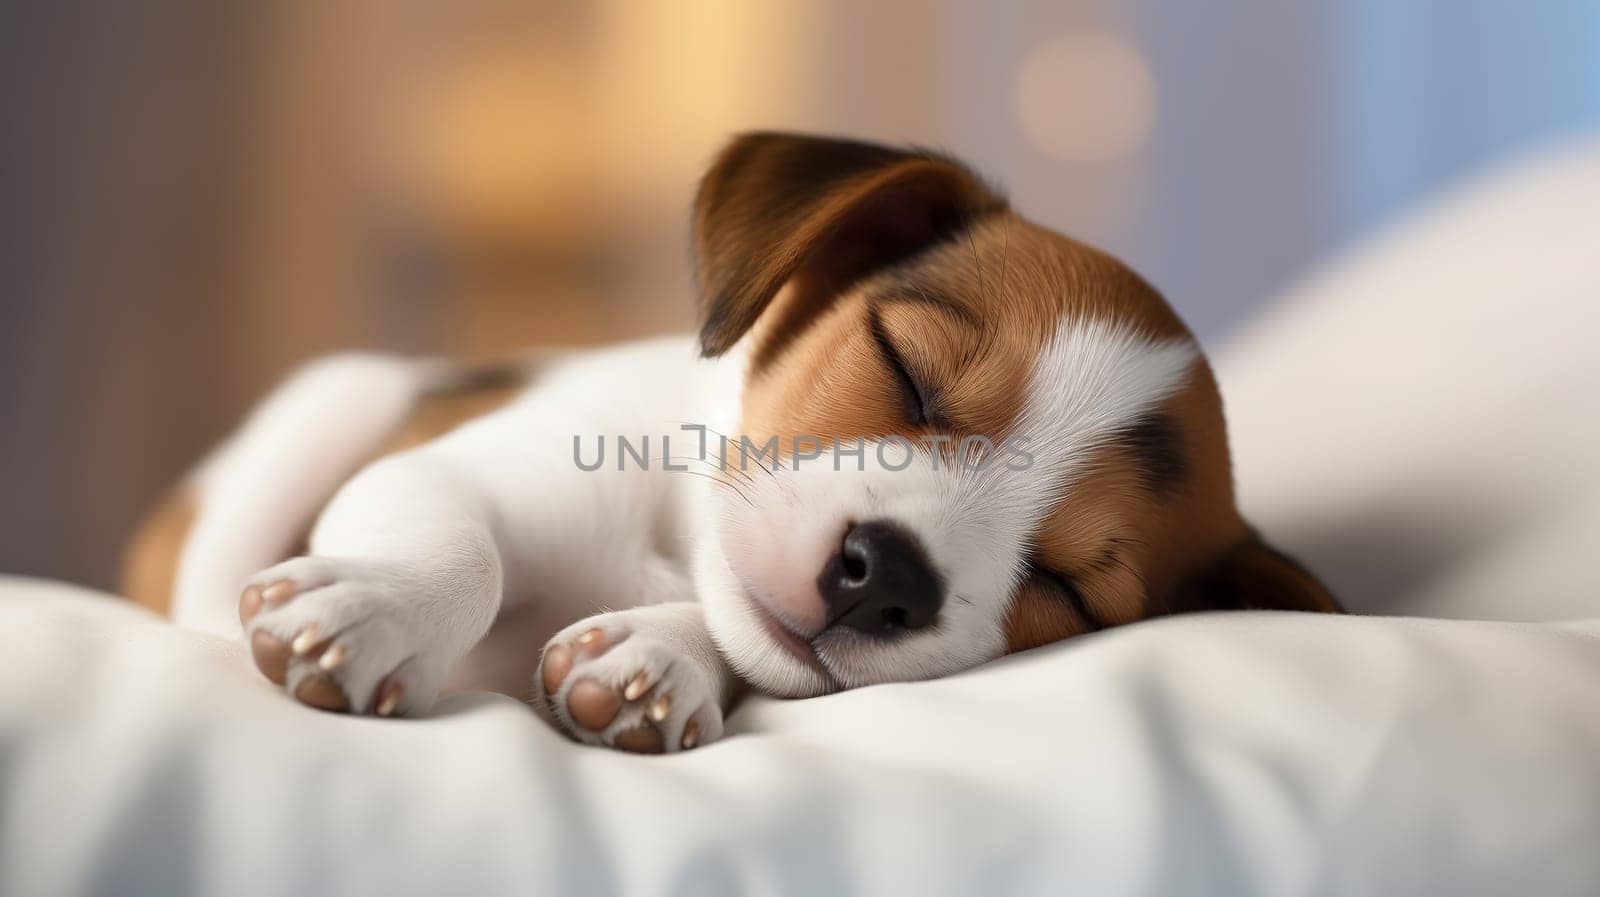 Jack russel terrier puppy sleeping on white bed. Ai art